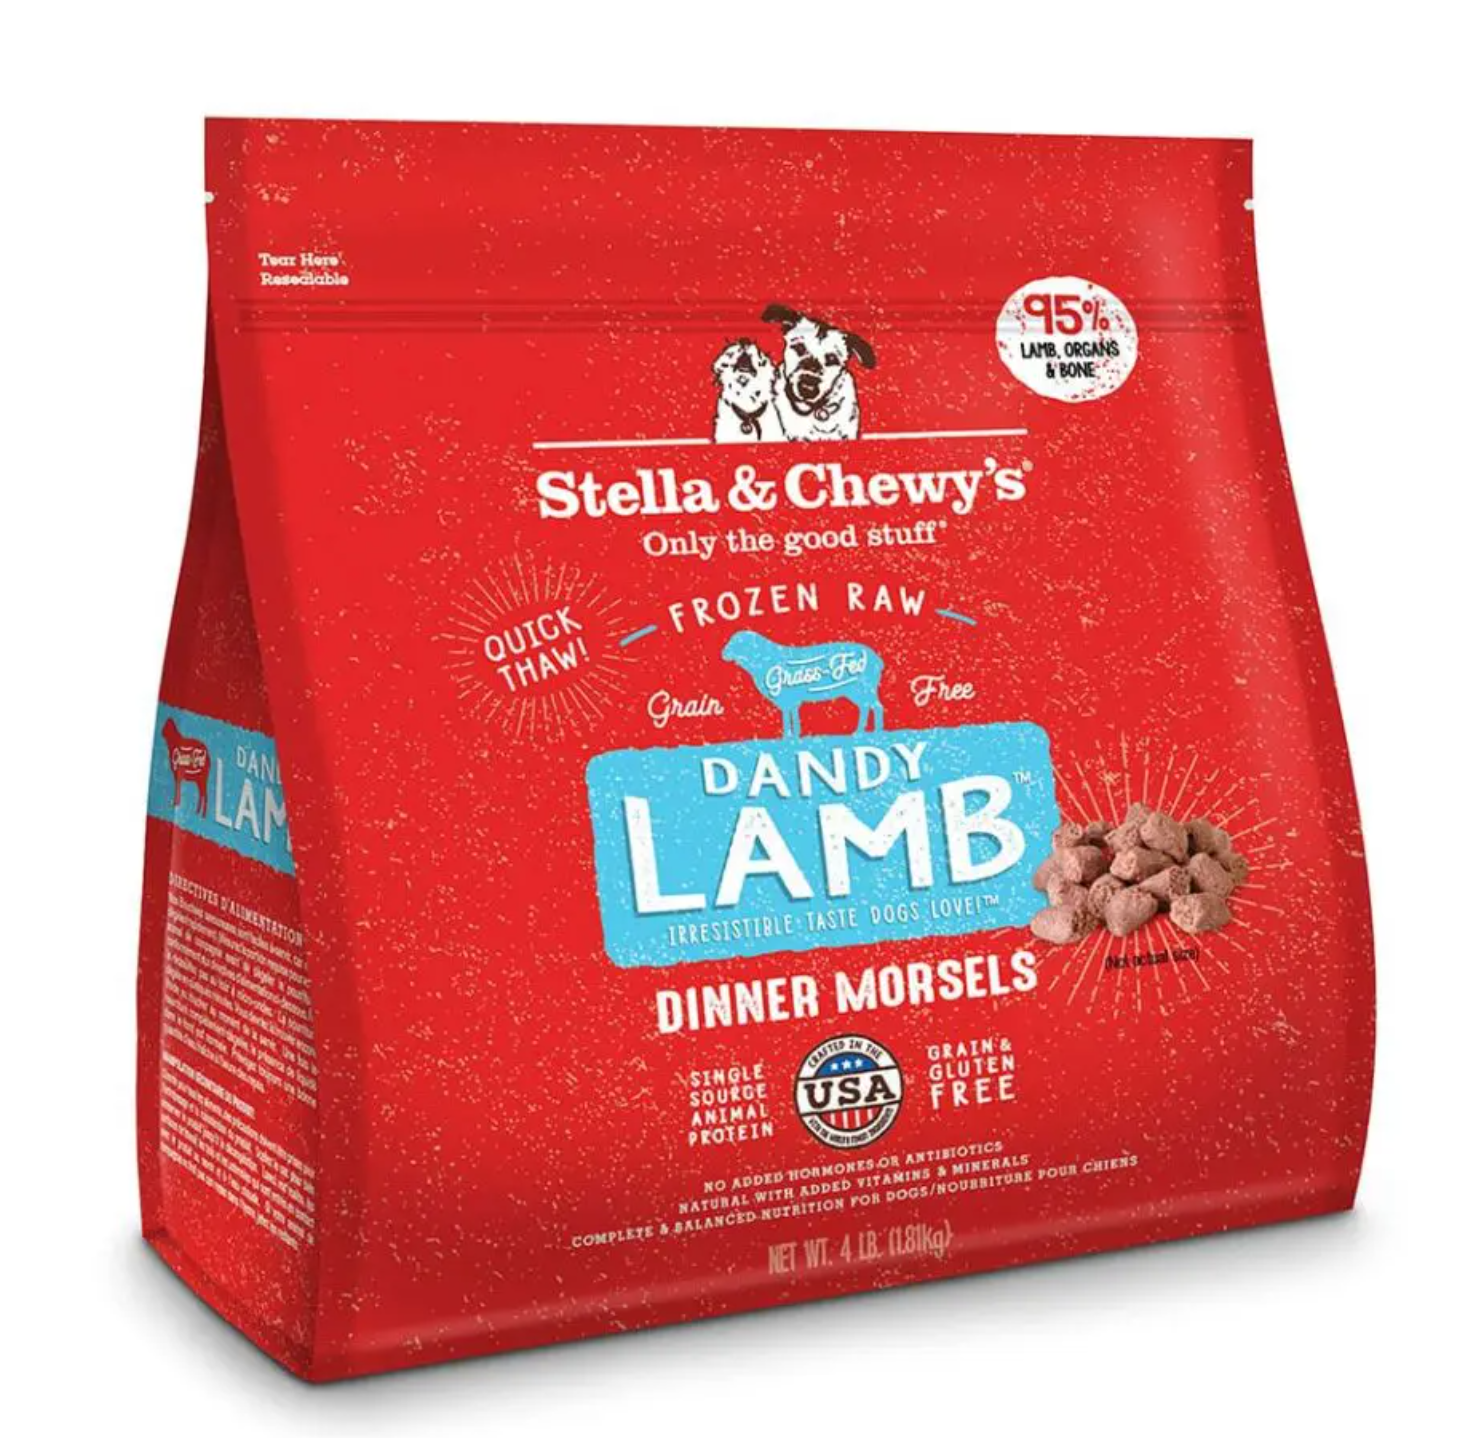 Stella & Chewy's Frozen Dinner Morsels Lamb for Dogs